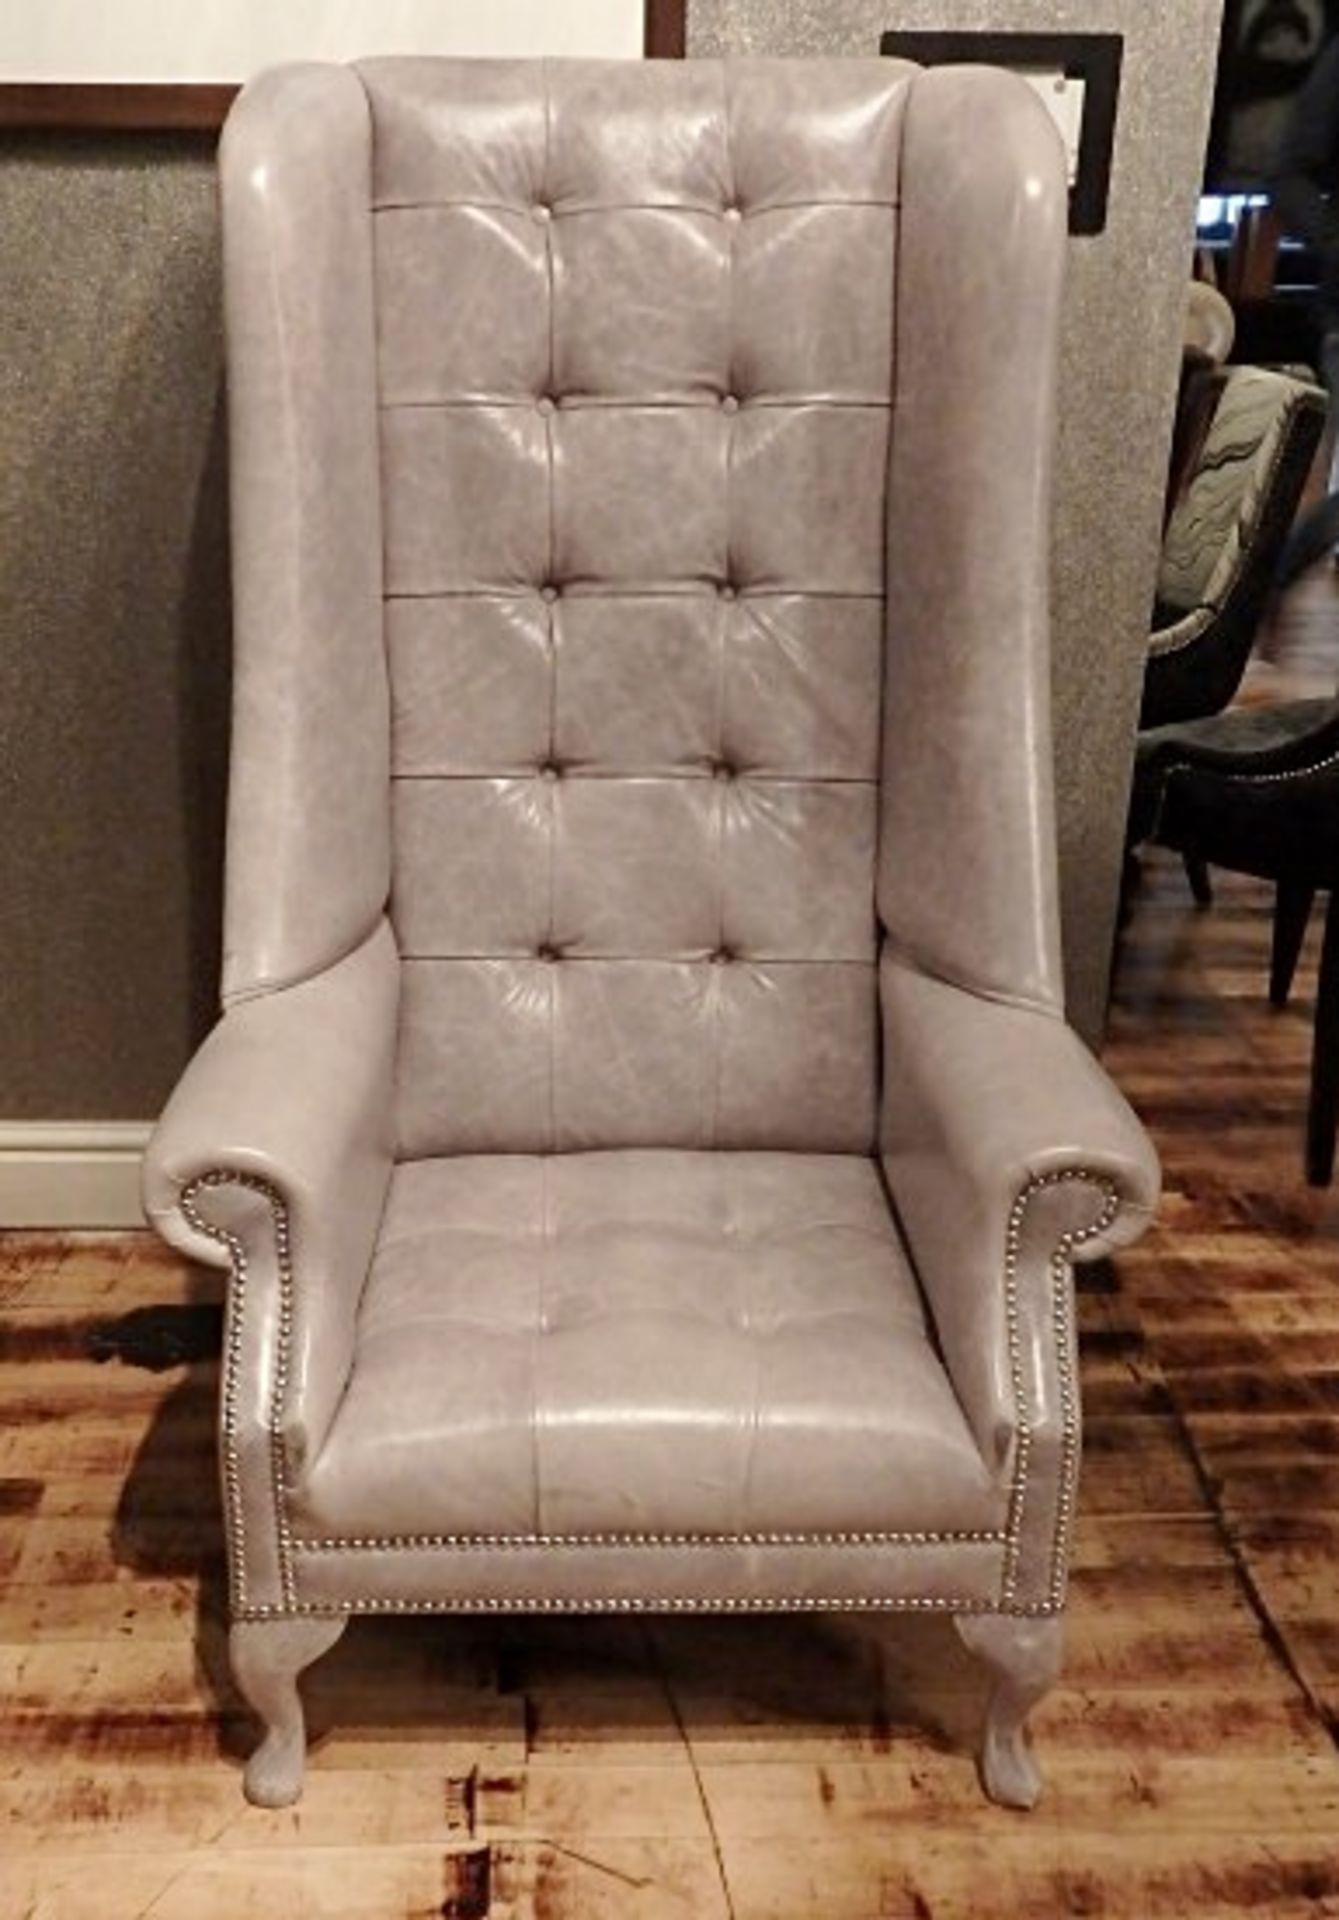 1 x Bespoke Handcrafted Button-Back Wing-Back Chair - Beautiful High-Back Chair In An Opulent Grey